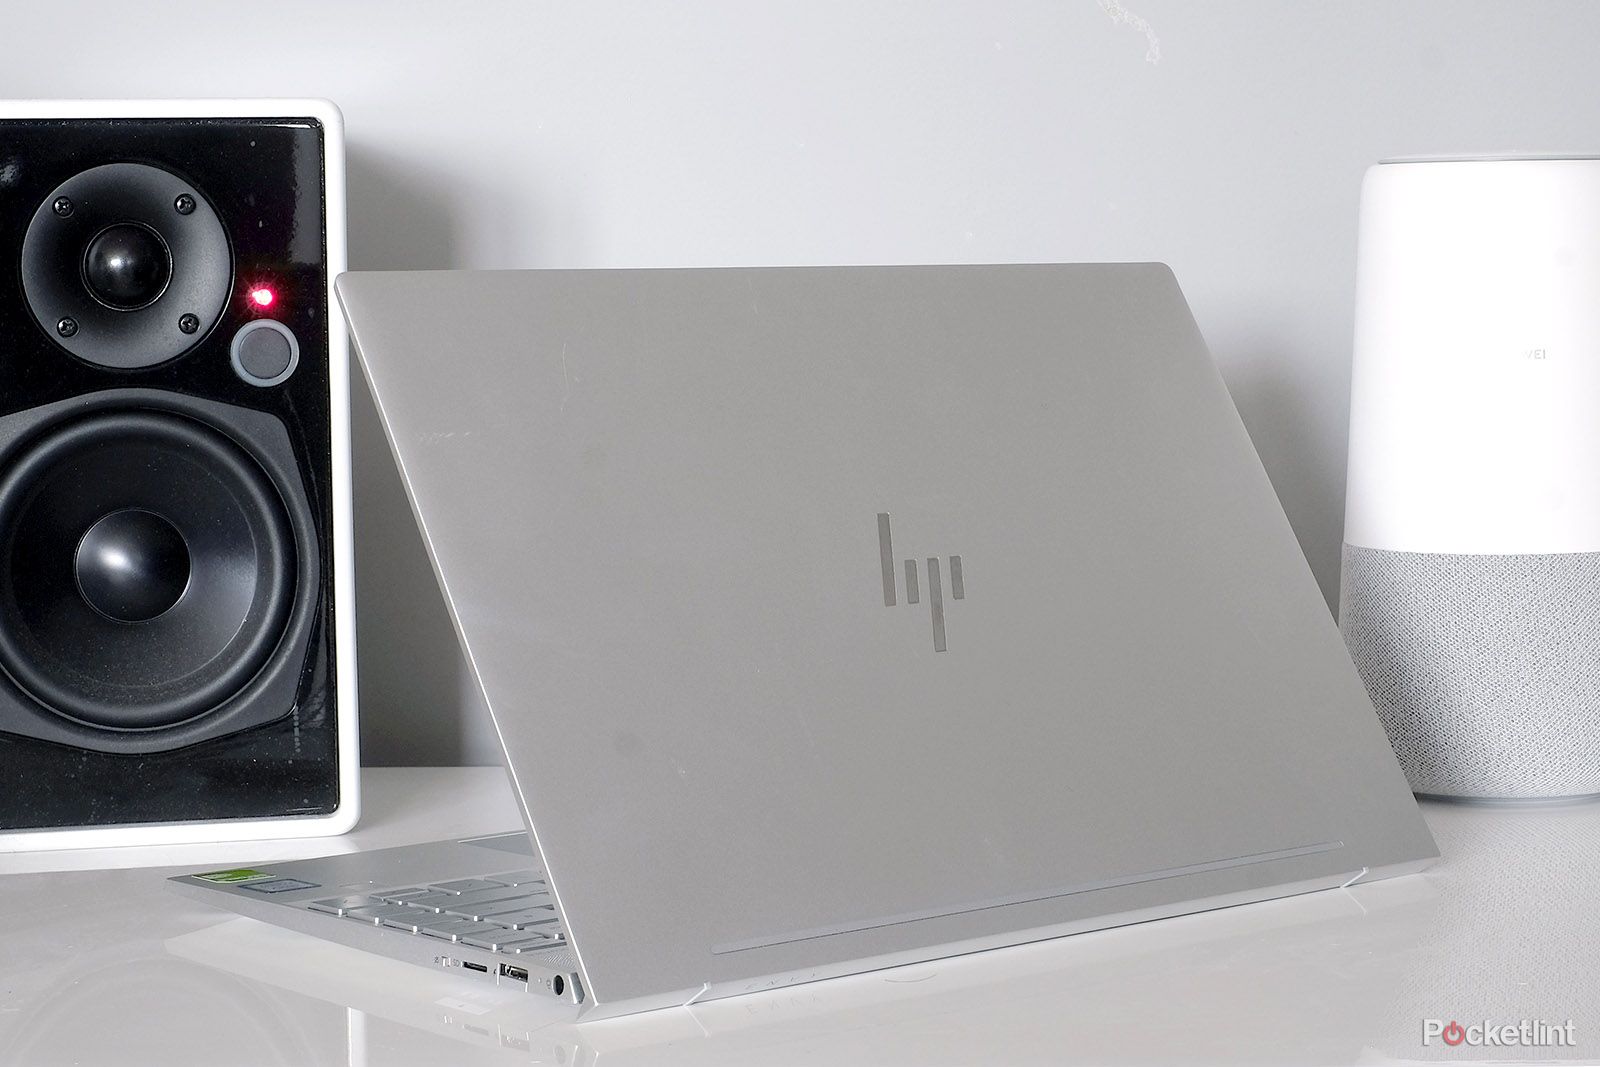 HP Envy 13 review image 4